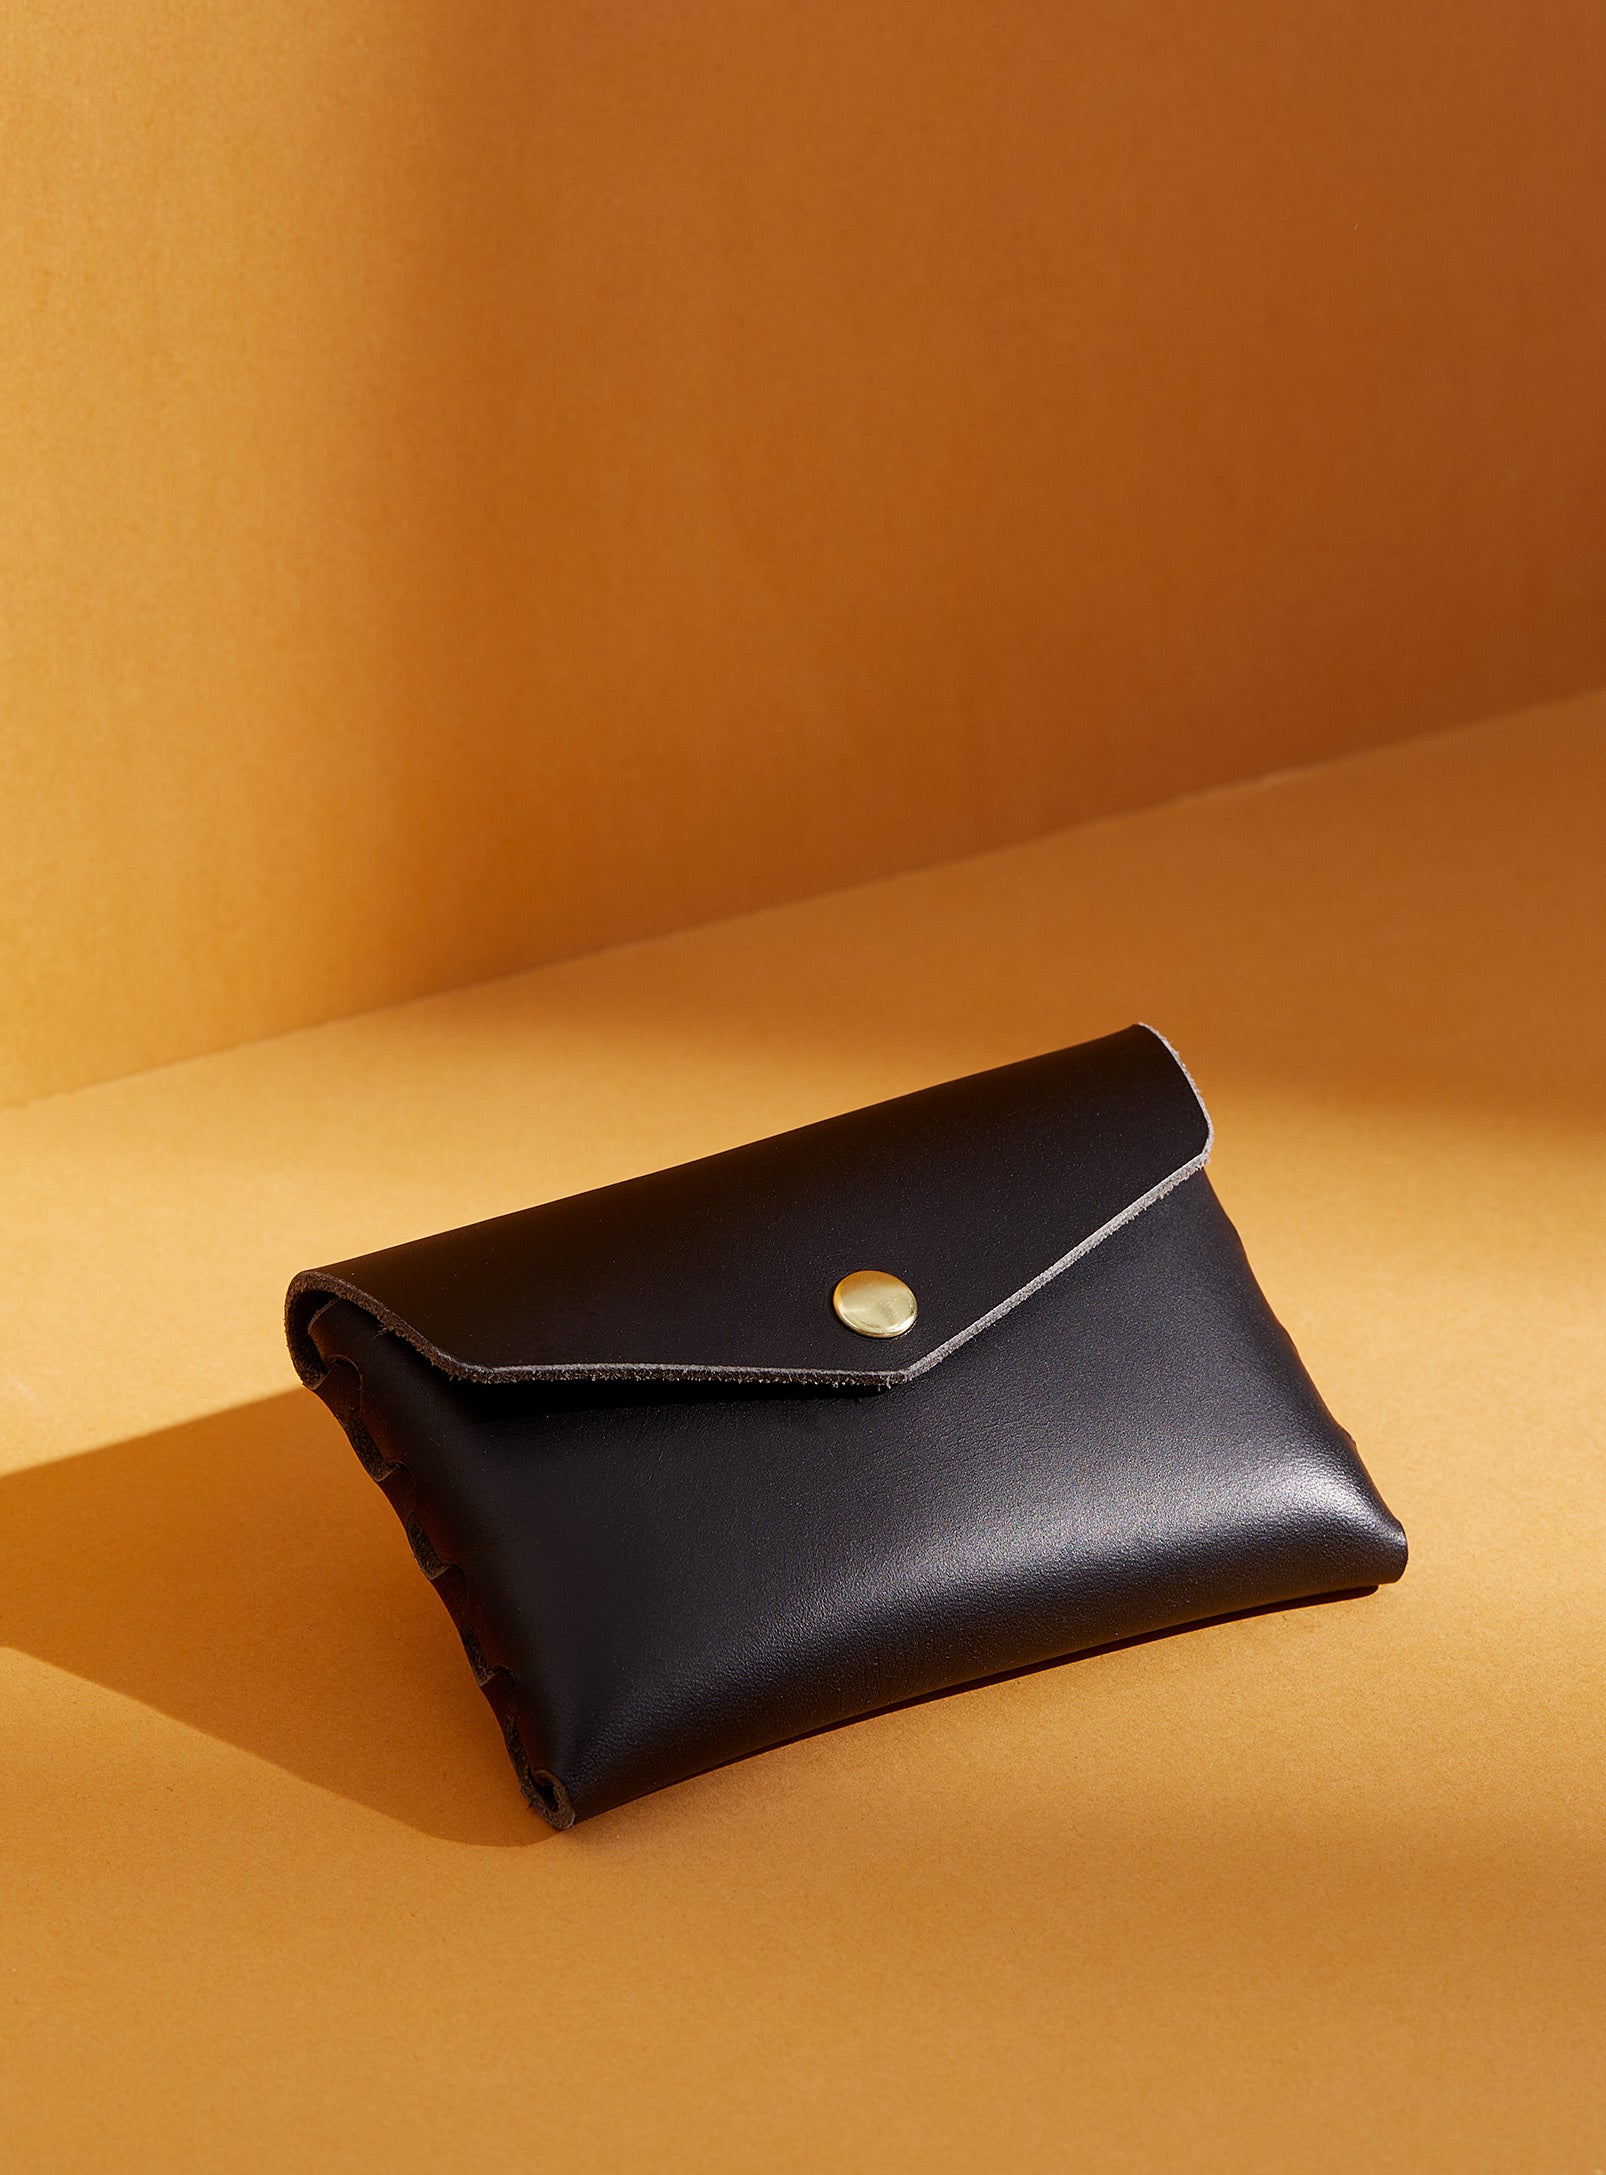 modjūl's classic pouch in black leather. A compact open wallet with endless possibilities, perfect for holding cards, keys or loose change. Handmade in Canada and joined with the signature modjūl joinery and quality brass hardware.